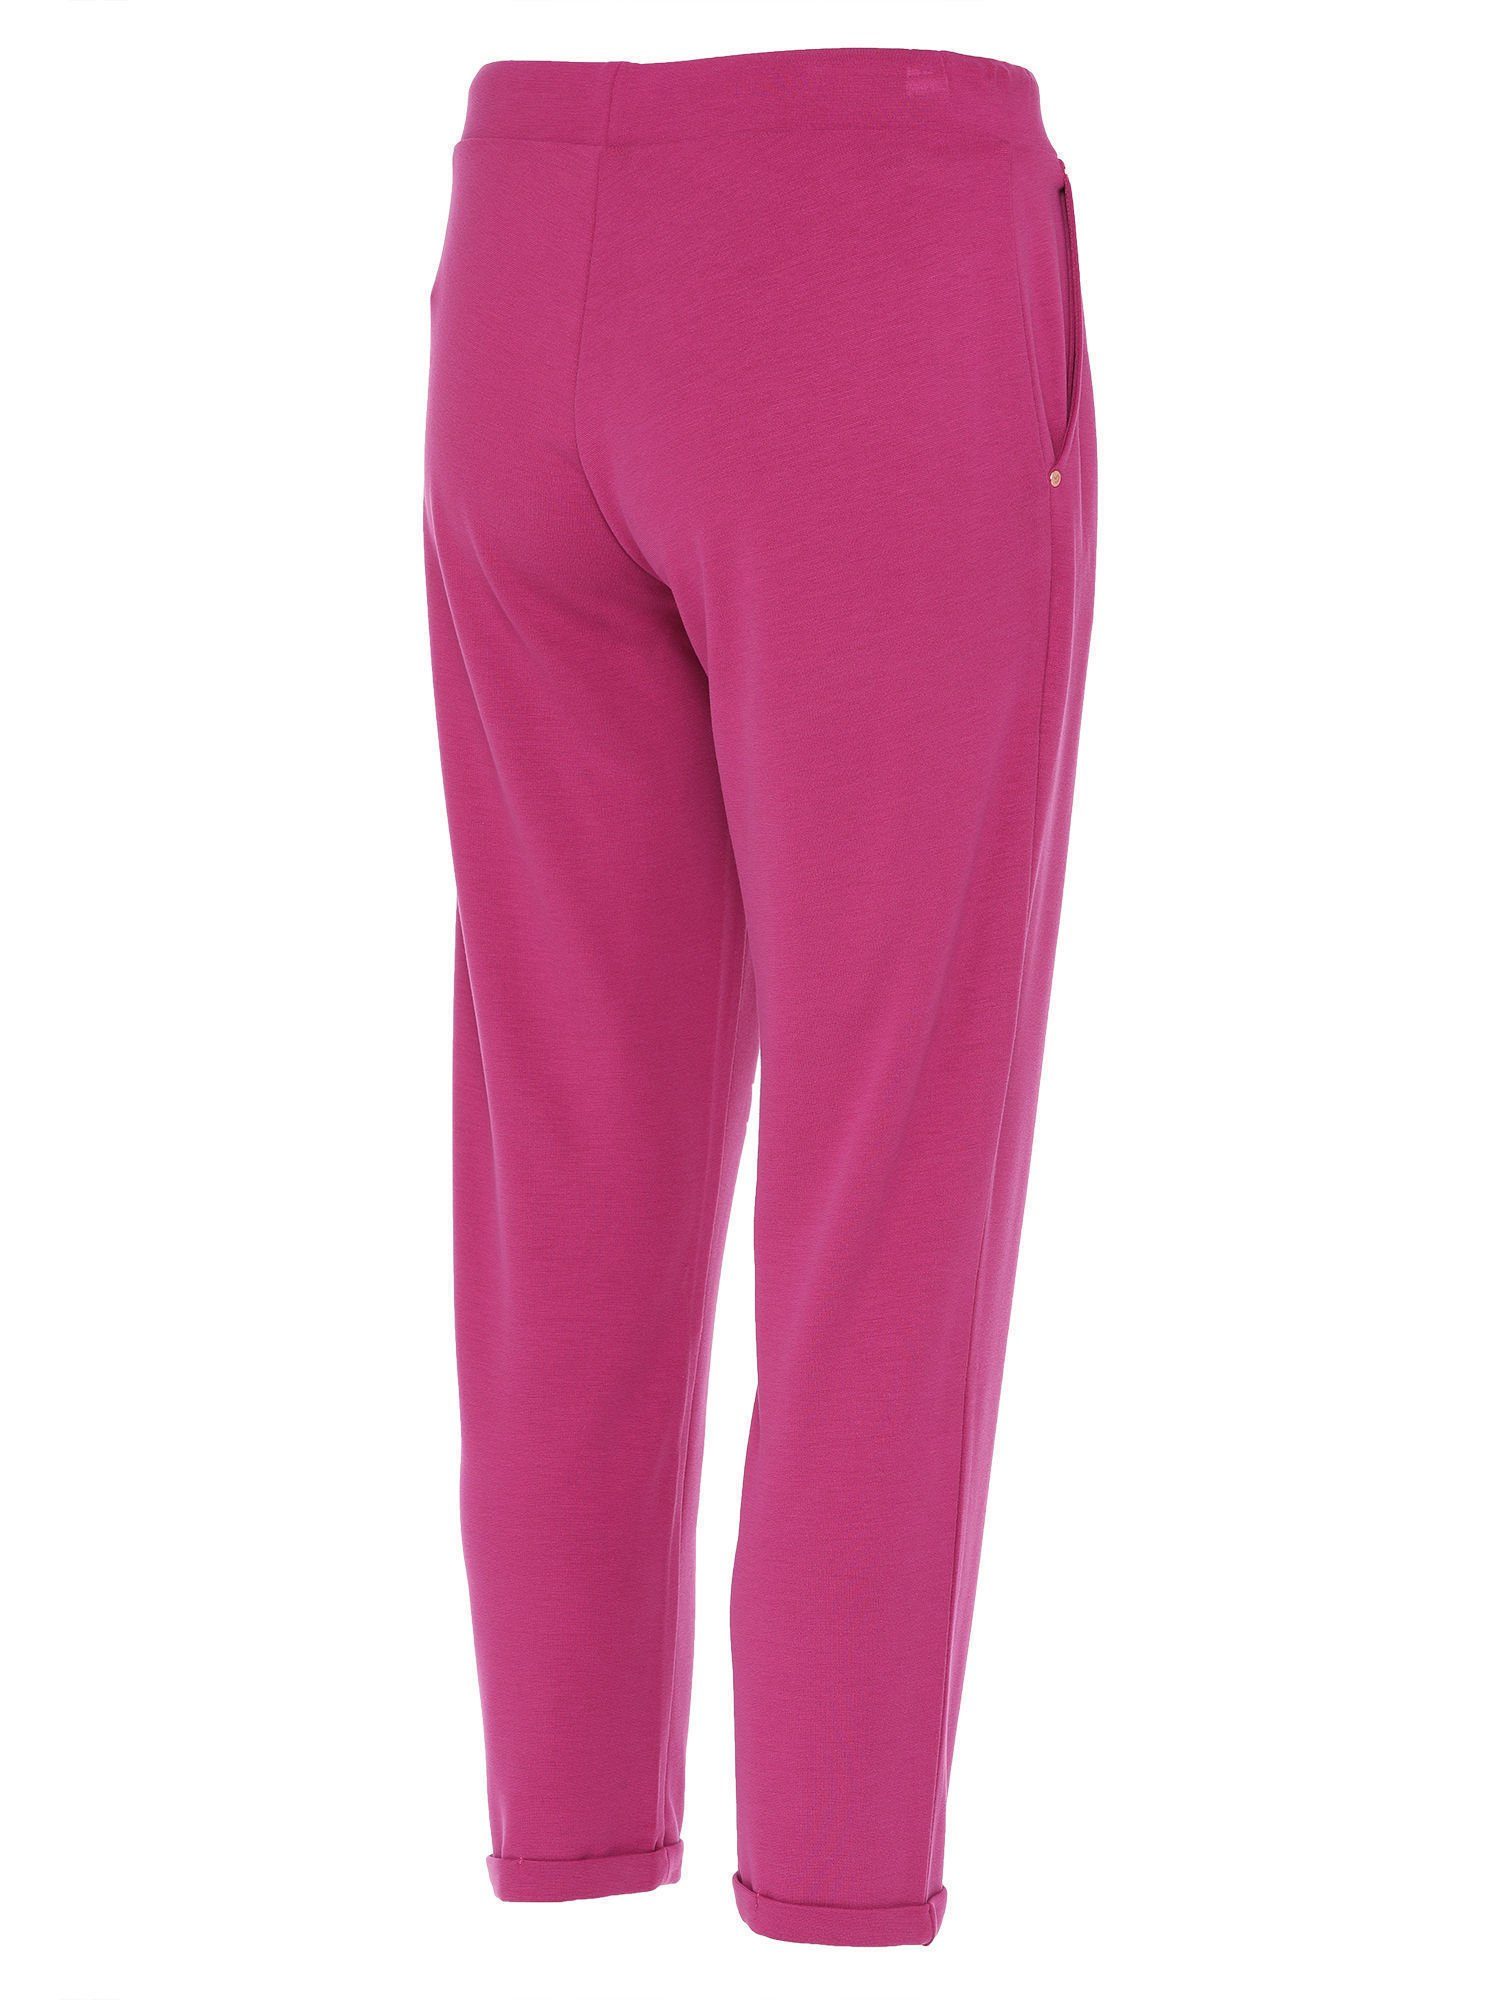 Christian Materne Jogger Pants Umschlagsaum mit fuchsia Relaxhose